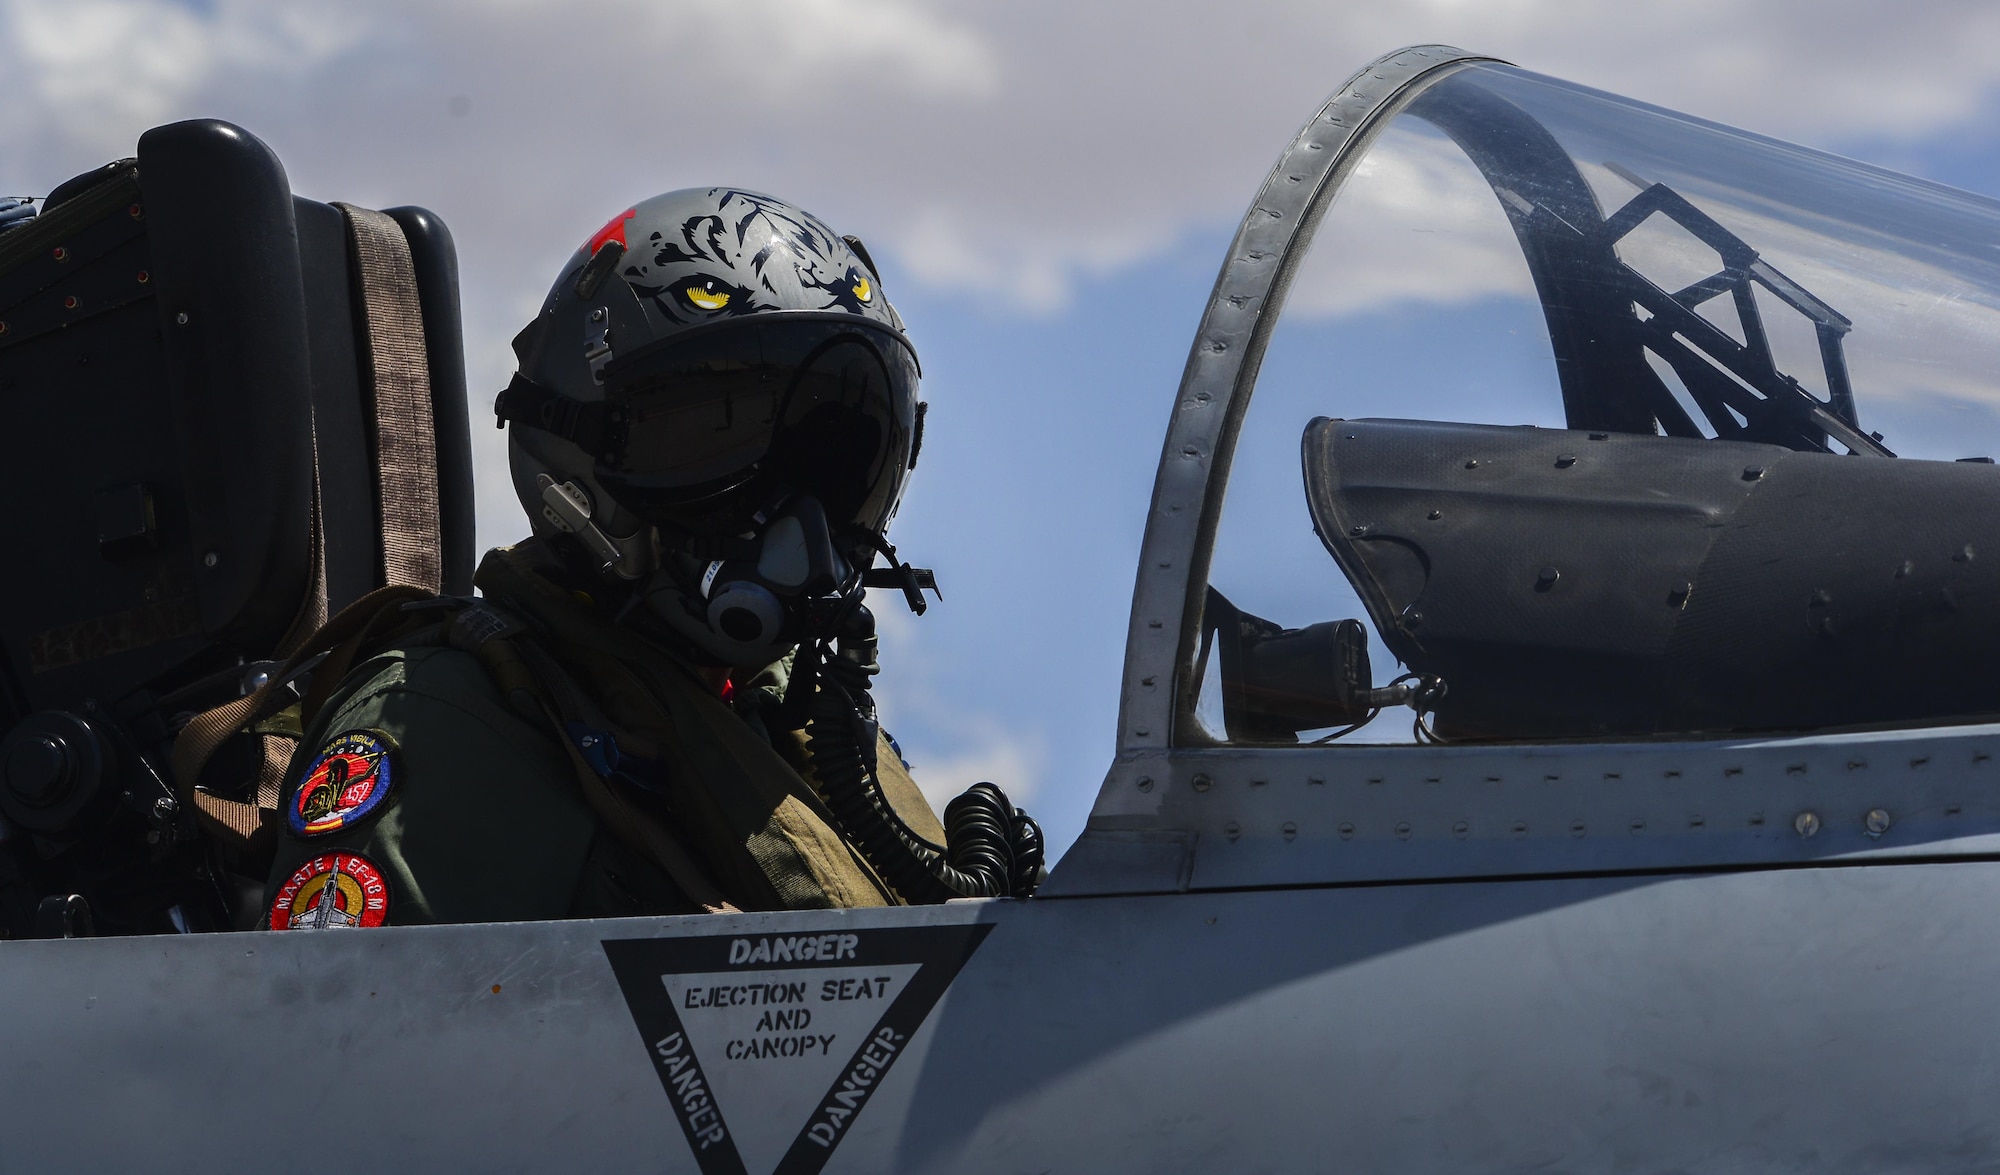 A Spanish air force pilot assigned to the 121st Squadron, Torrejon Air Base, prepares for takeoff at Nellis Air Force Base, Nev., Aug. 18, 2016. Flying units from around the globe deploy to Nellis AFB to participate in Red Flag, the exercise is held four times a year and organized by the 414th Combat Training Squadron. (U.S. Air Force photo by Airman 1st Class Nathan Byrnes)